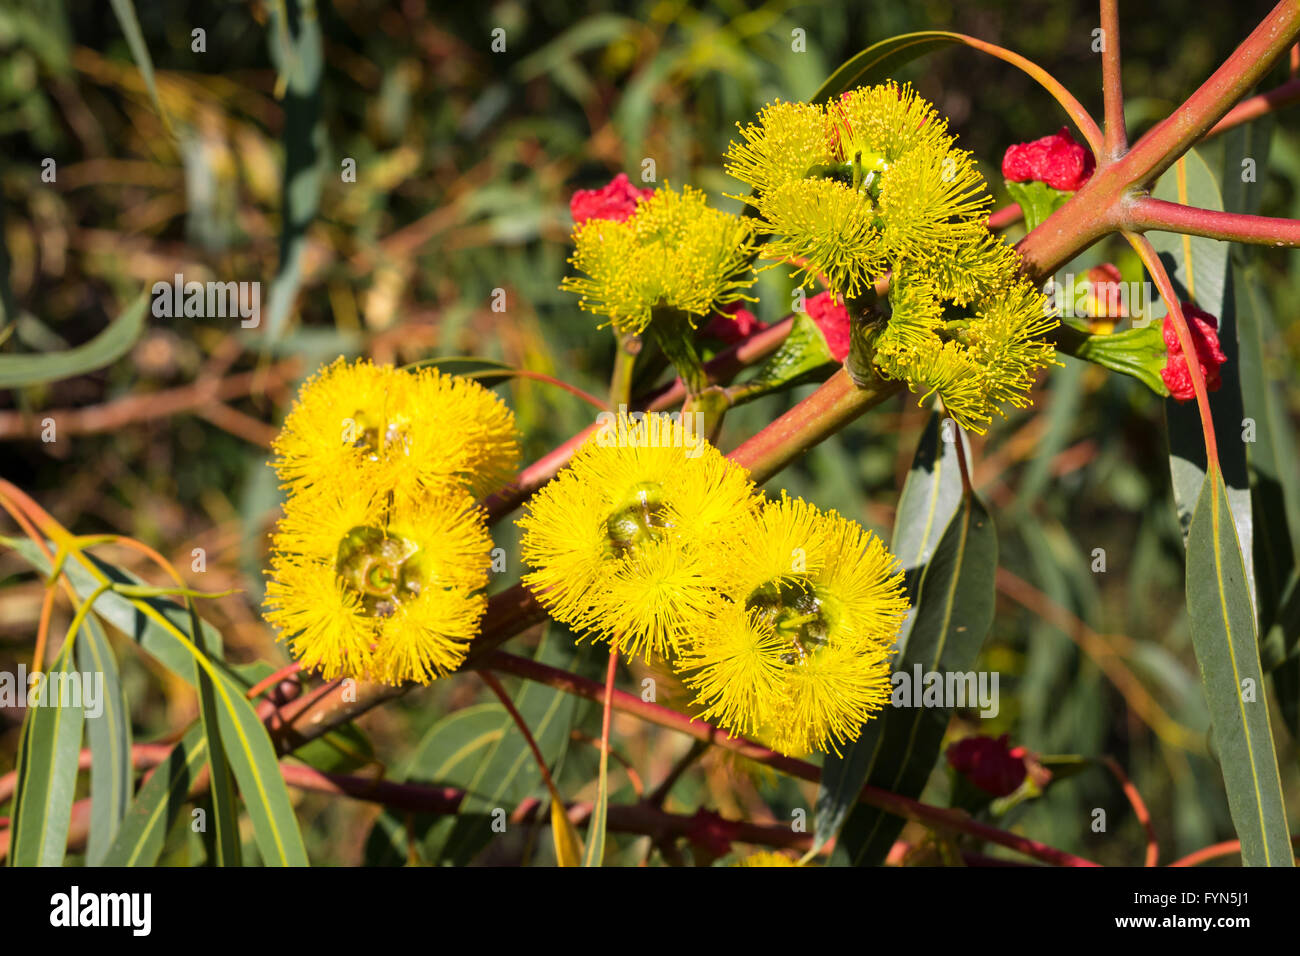 Widely seen around Perth and southern Western Australia, the Red-Capped Gum has stunning flowers in a distinctive yellow. Stock Photo